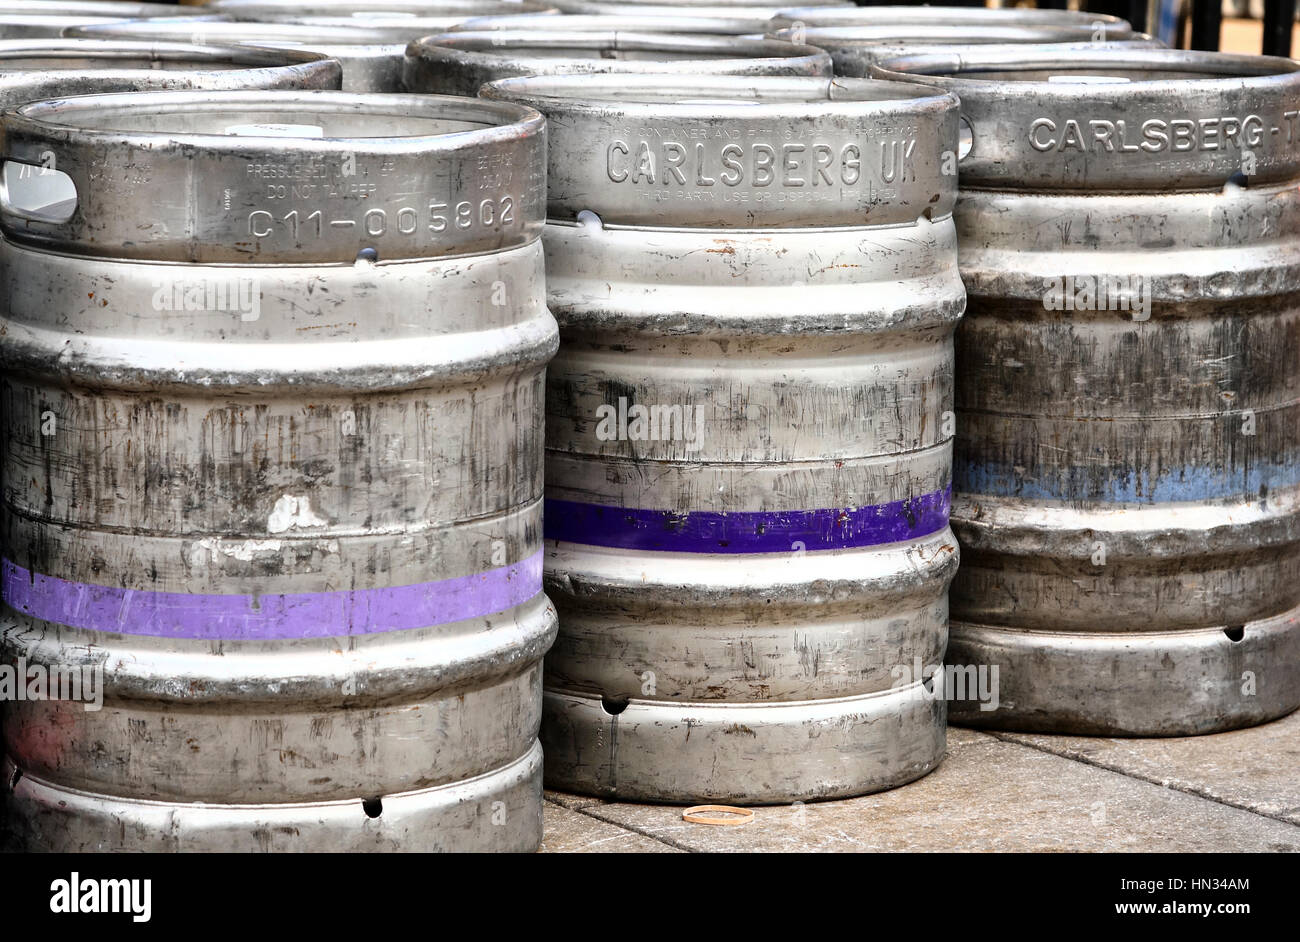 Aluminium beer real ale,lager kegs (barrels) stacked on the pavement in the city of leeds uk after a brewery delivery to a pub Stock Photo